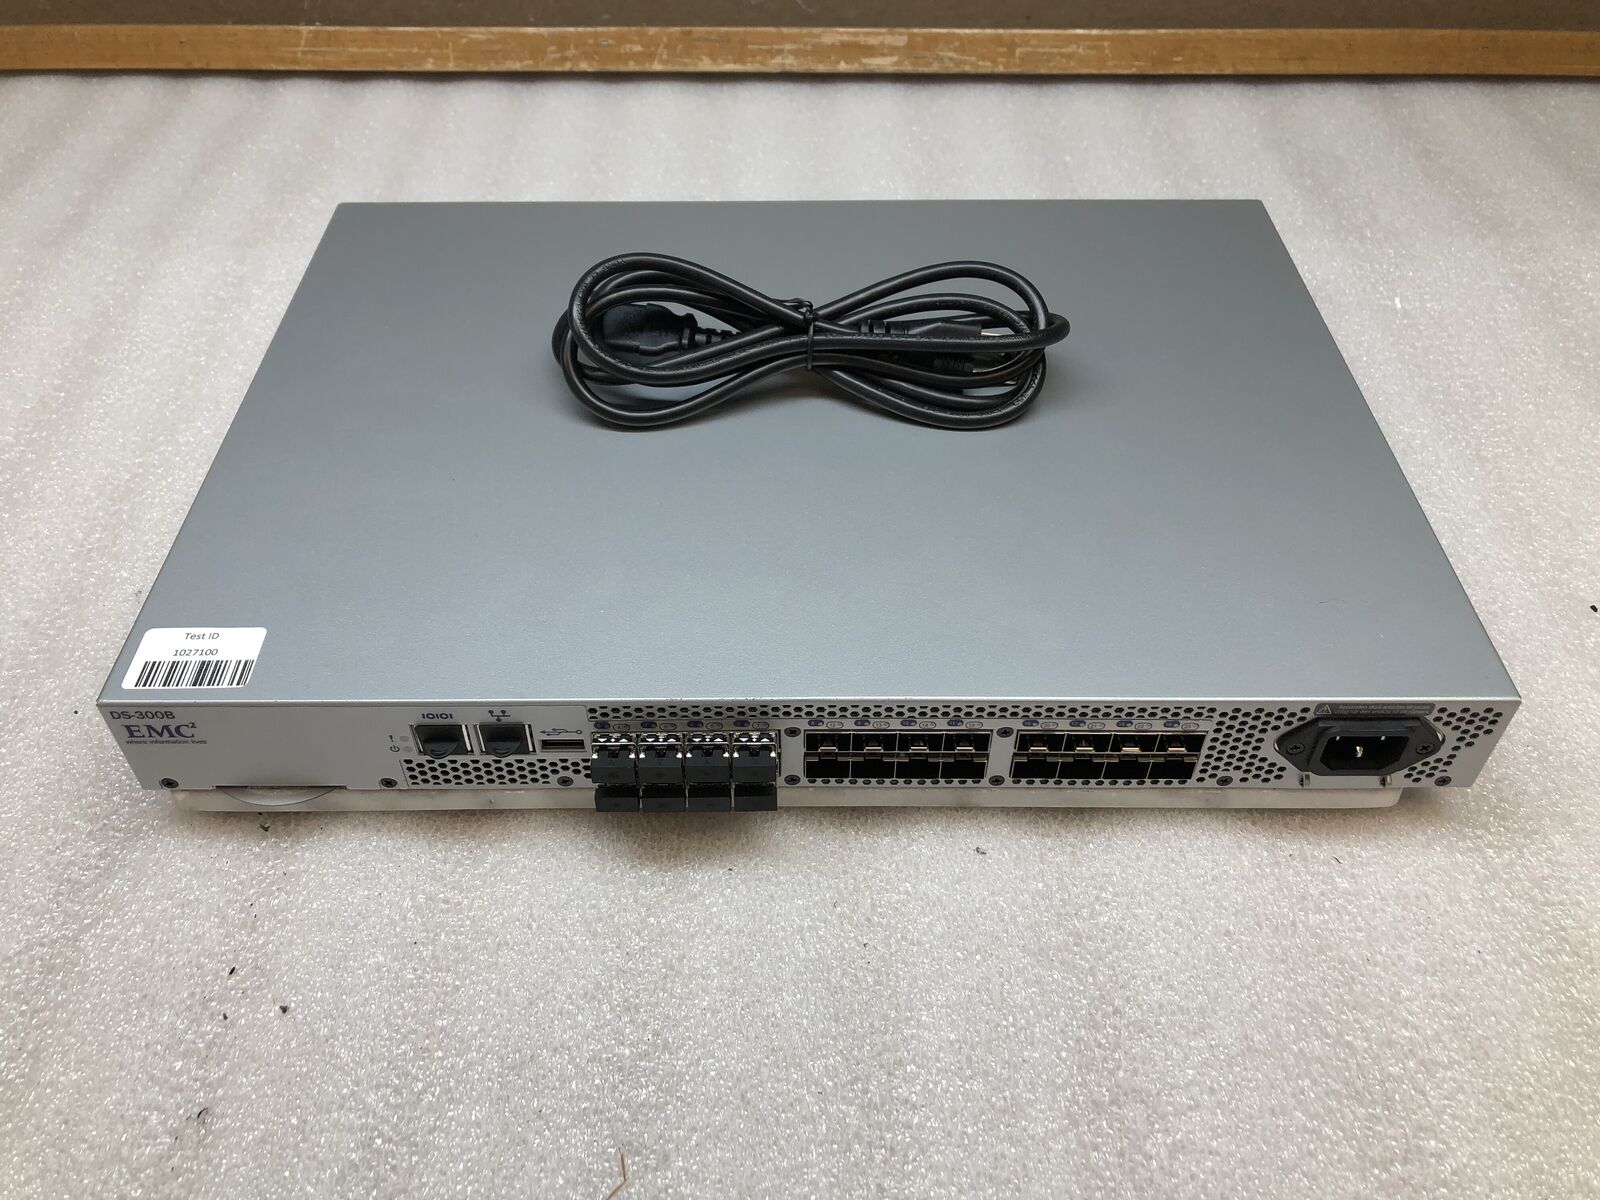 Brocade EMC DS-300B 100-652-065 SAN Fiber Channel Switch -TESTED & FACTORY RESET